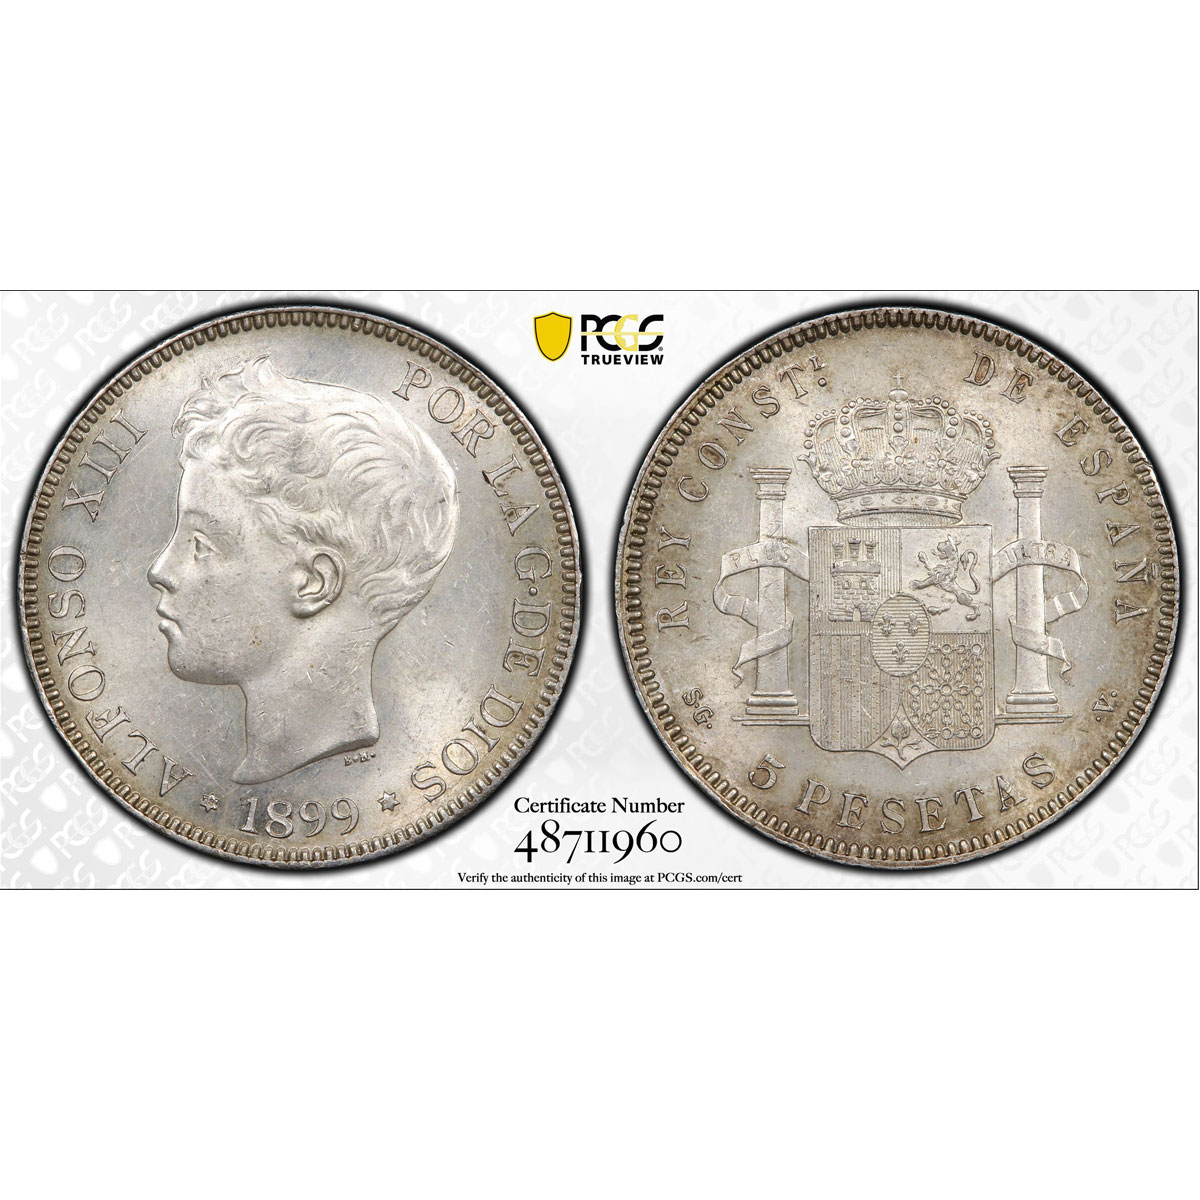 Spain 5 pesetas Regular Coinage Child Alfonso KM-707 MS63 PCGS silver coin 1899